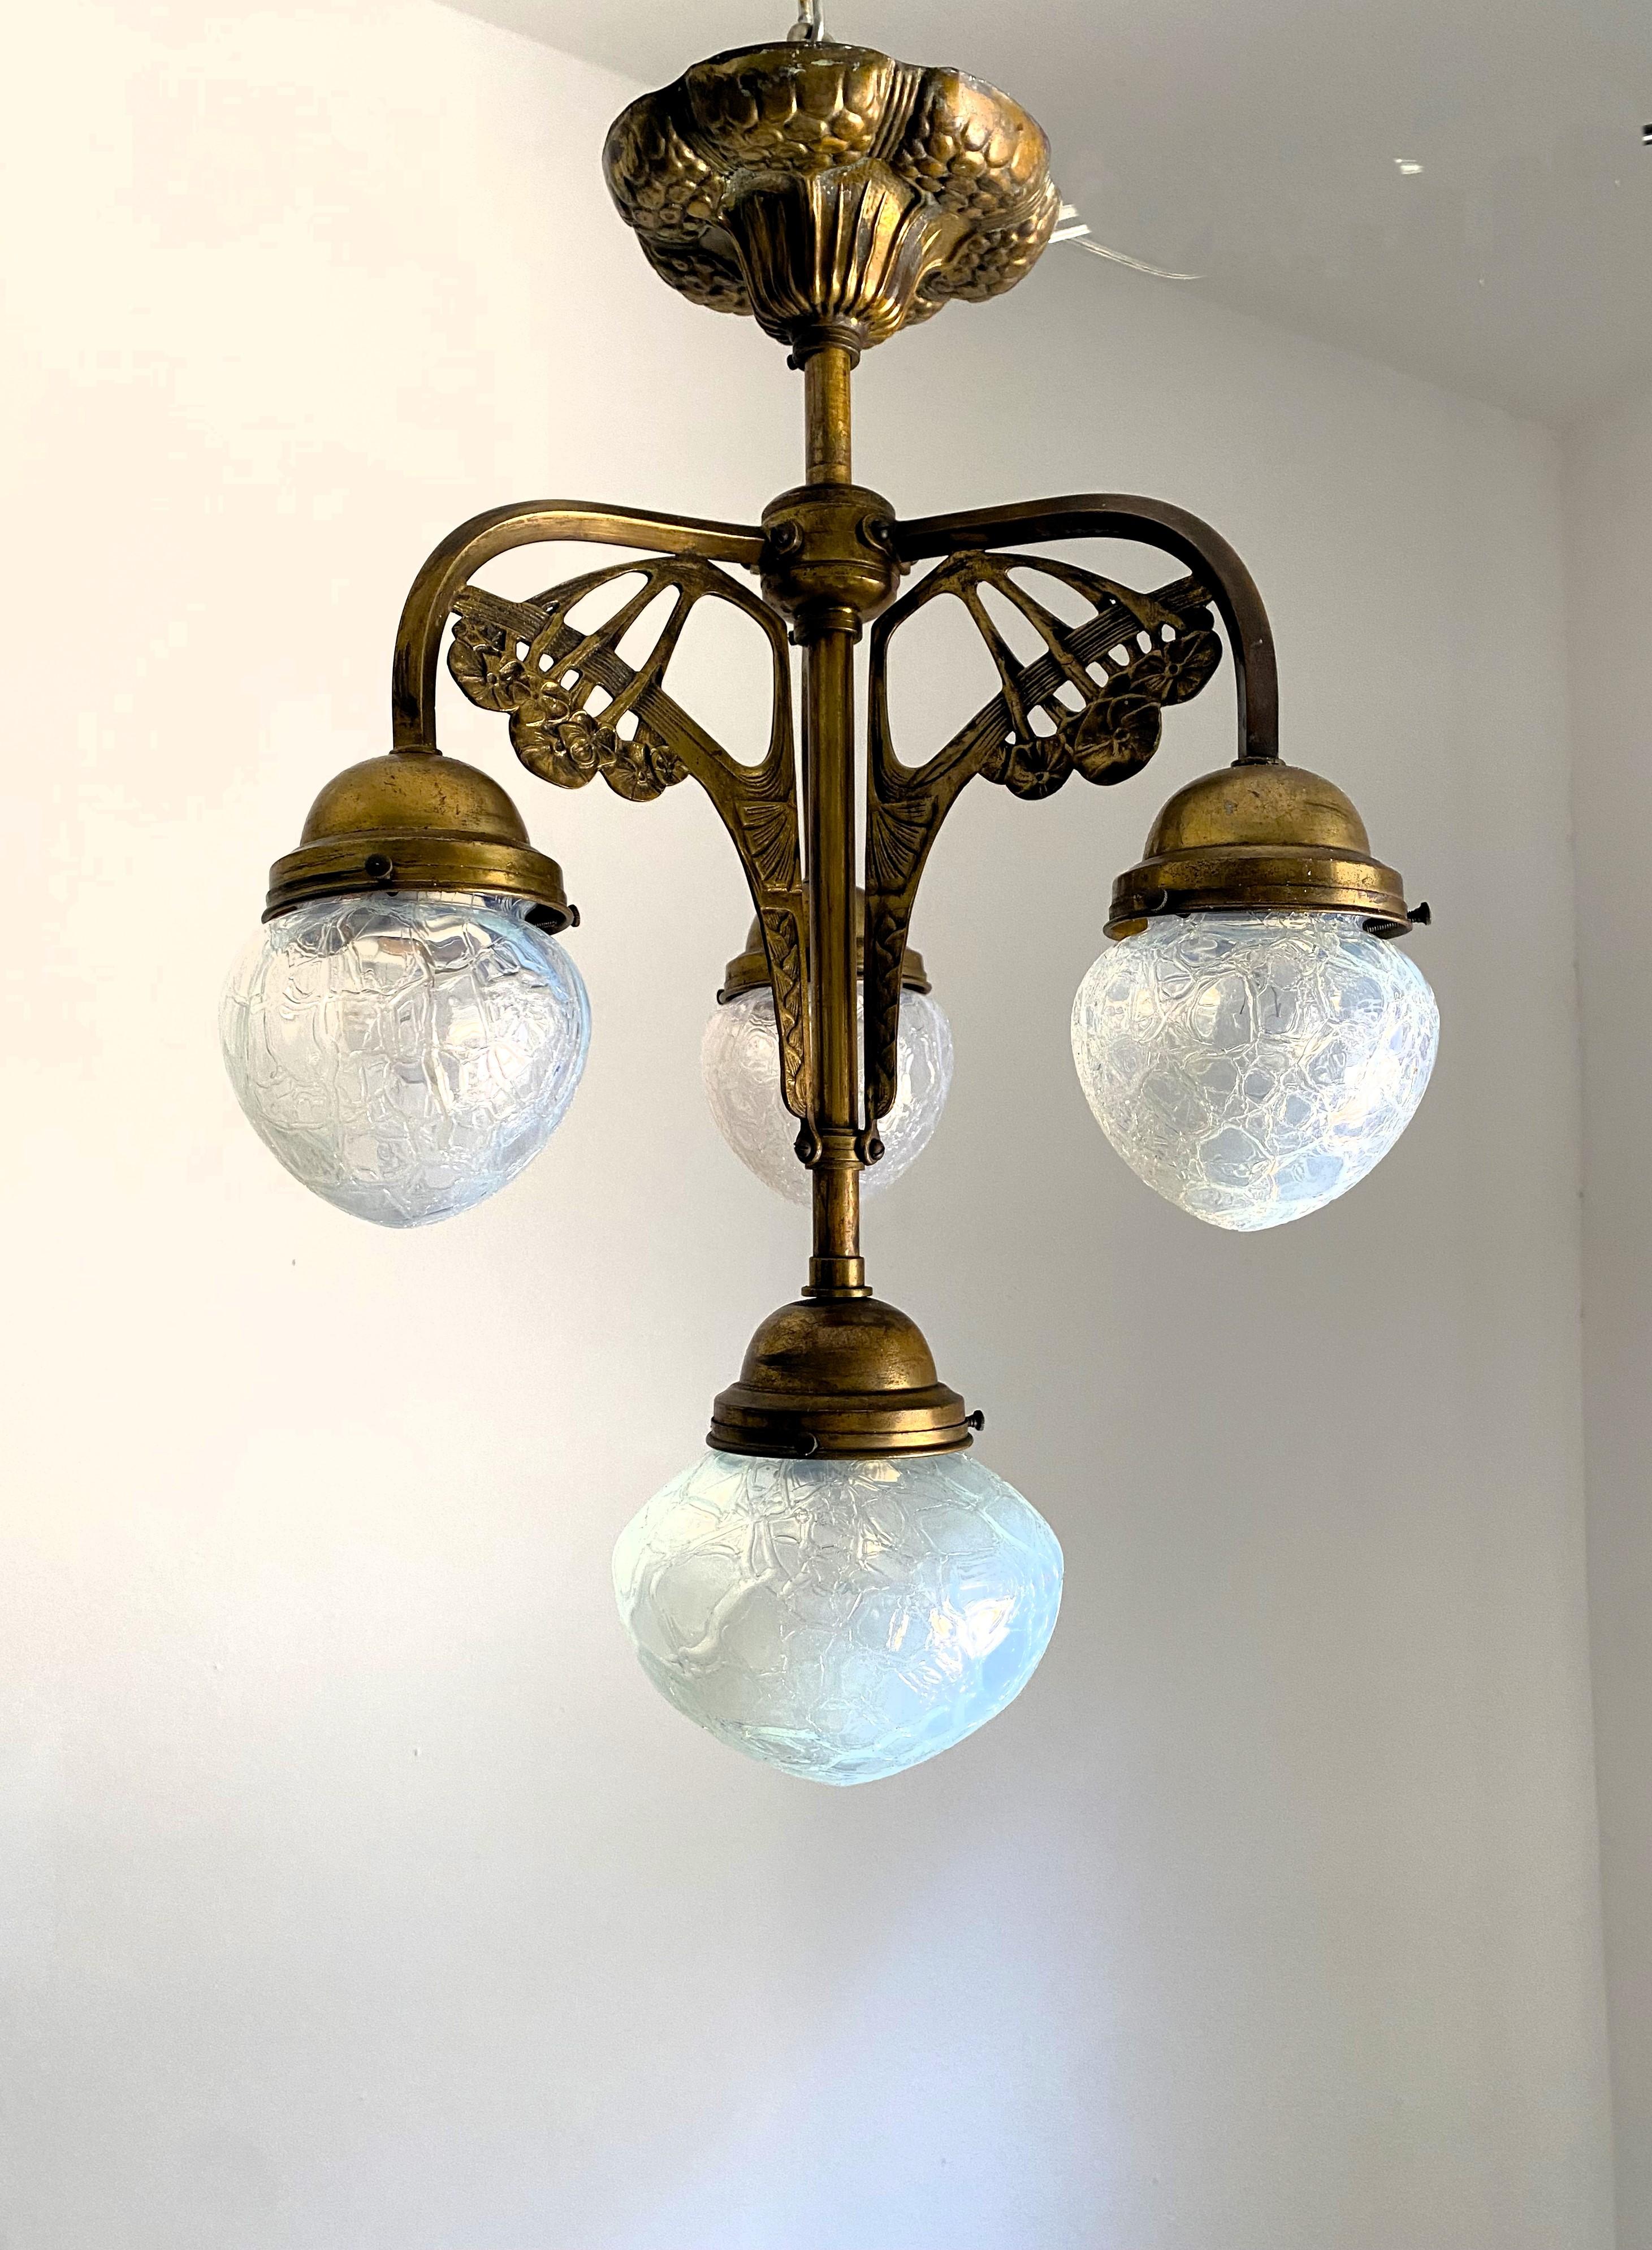 Art Nouveau chandelier manufactured in brass and hand blown opalescent glass.
The structure of the chandelier is adorned by floral motifs and shows a dark patina throughout, this can be polished back to golden easily if the client wants us to do